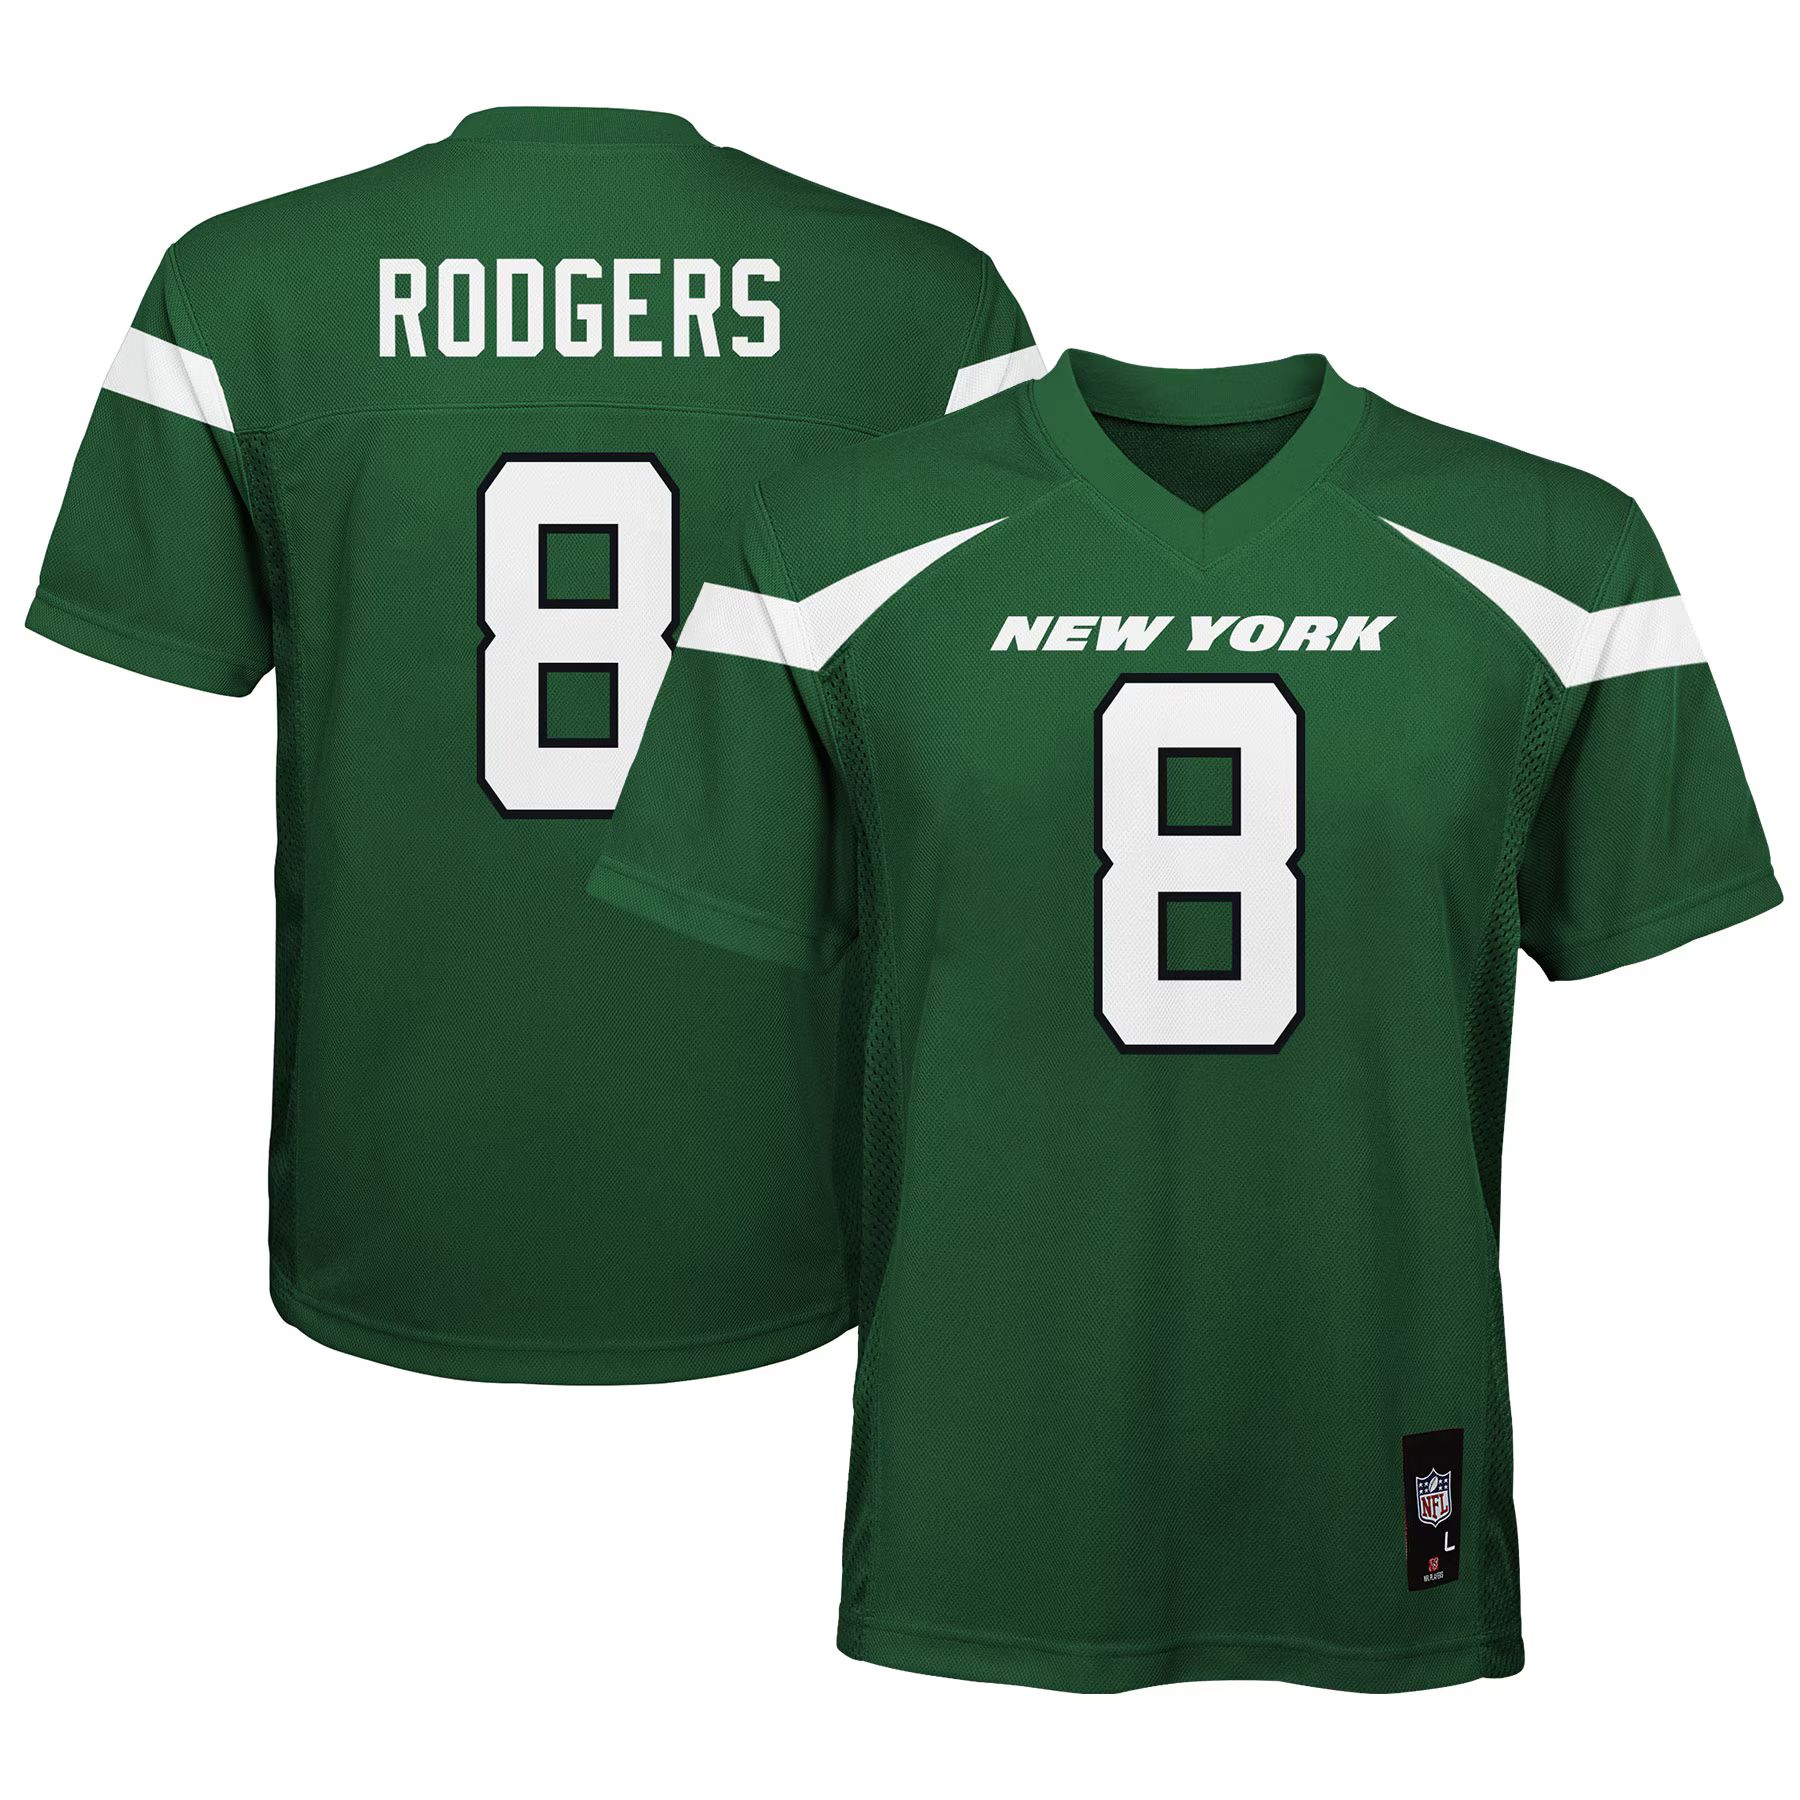 Aaron Rodgers New York Jets Youth Replica Player Jersey - Gotham Green | Fanatics